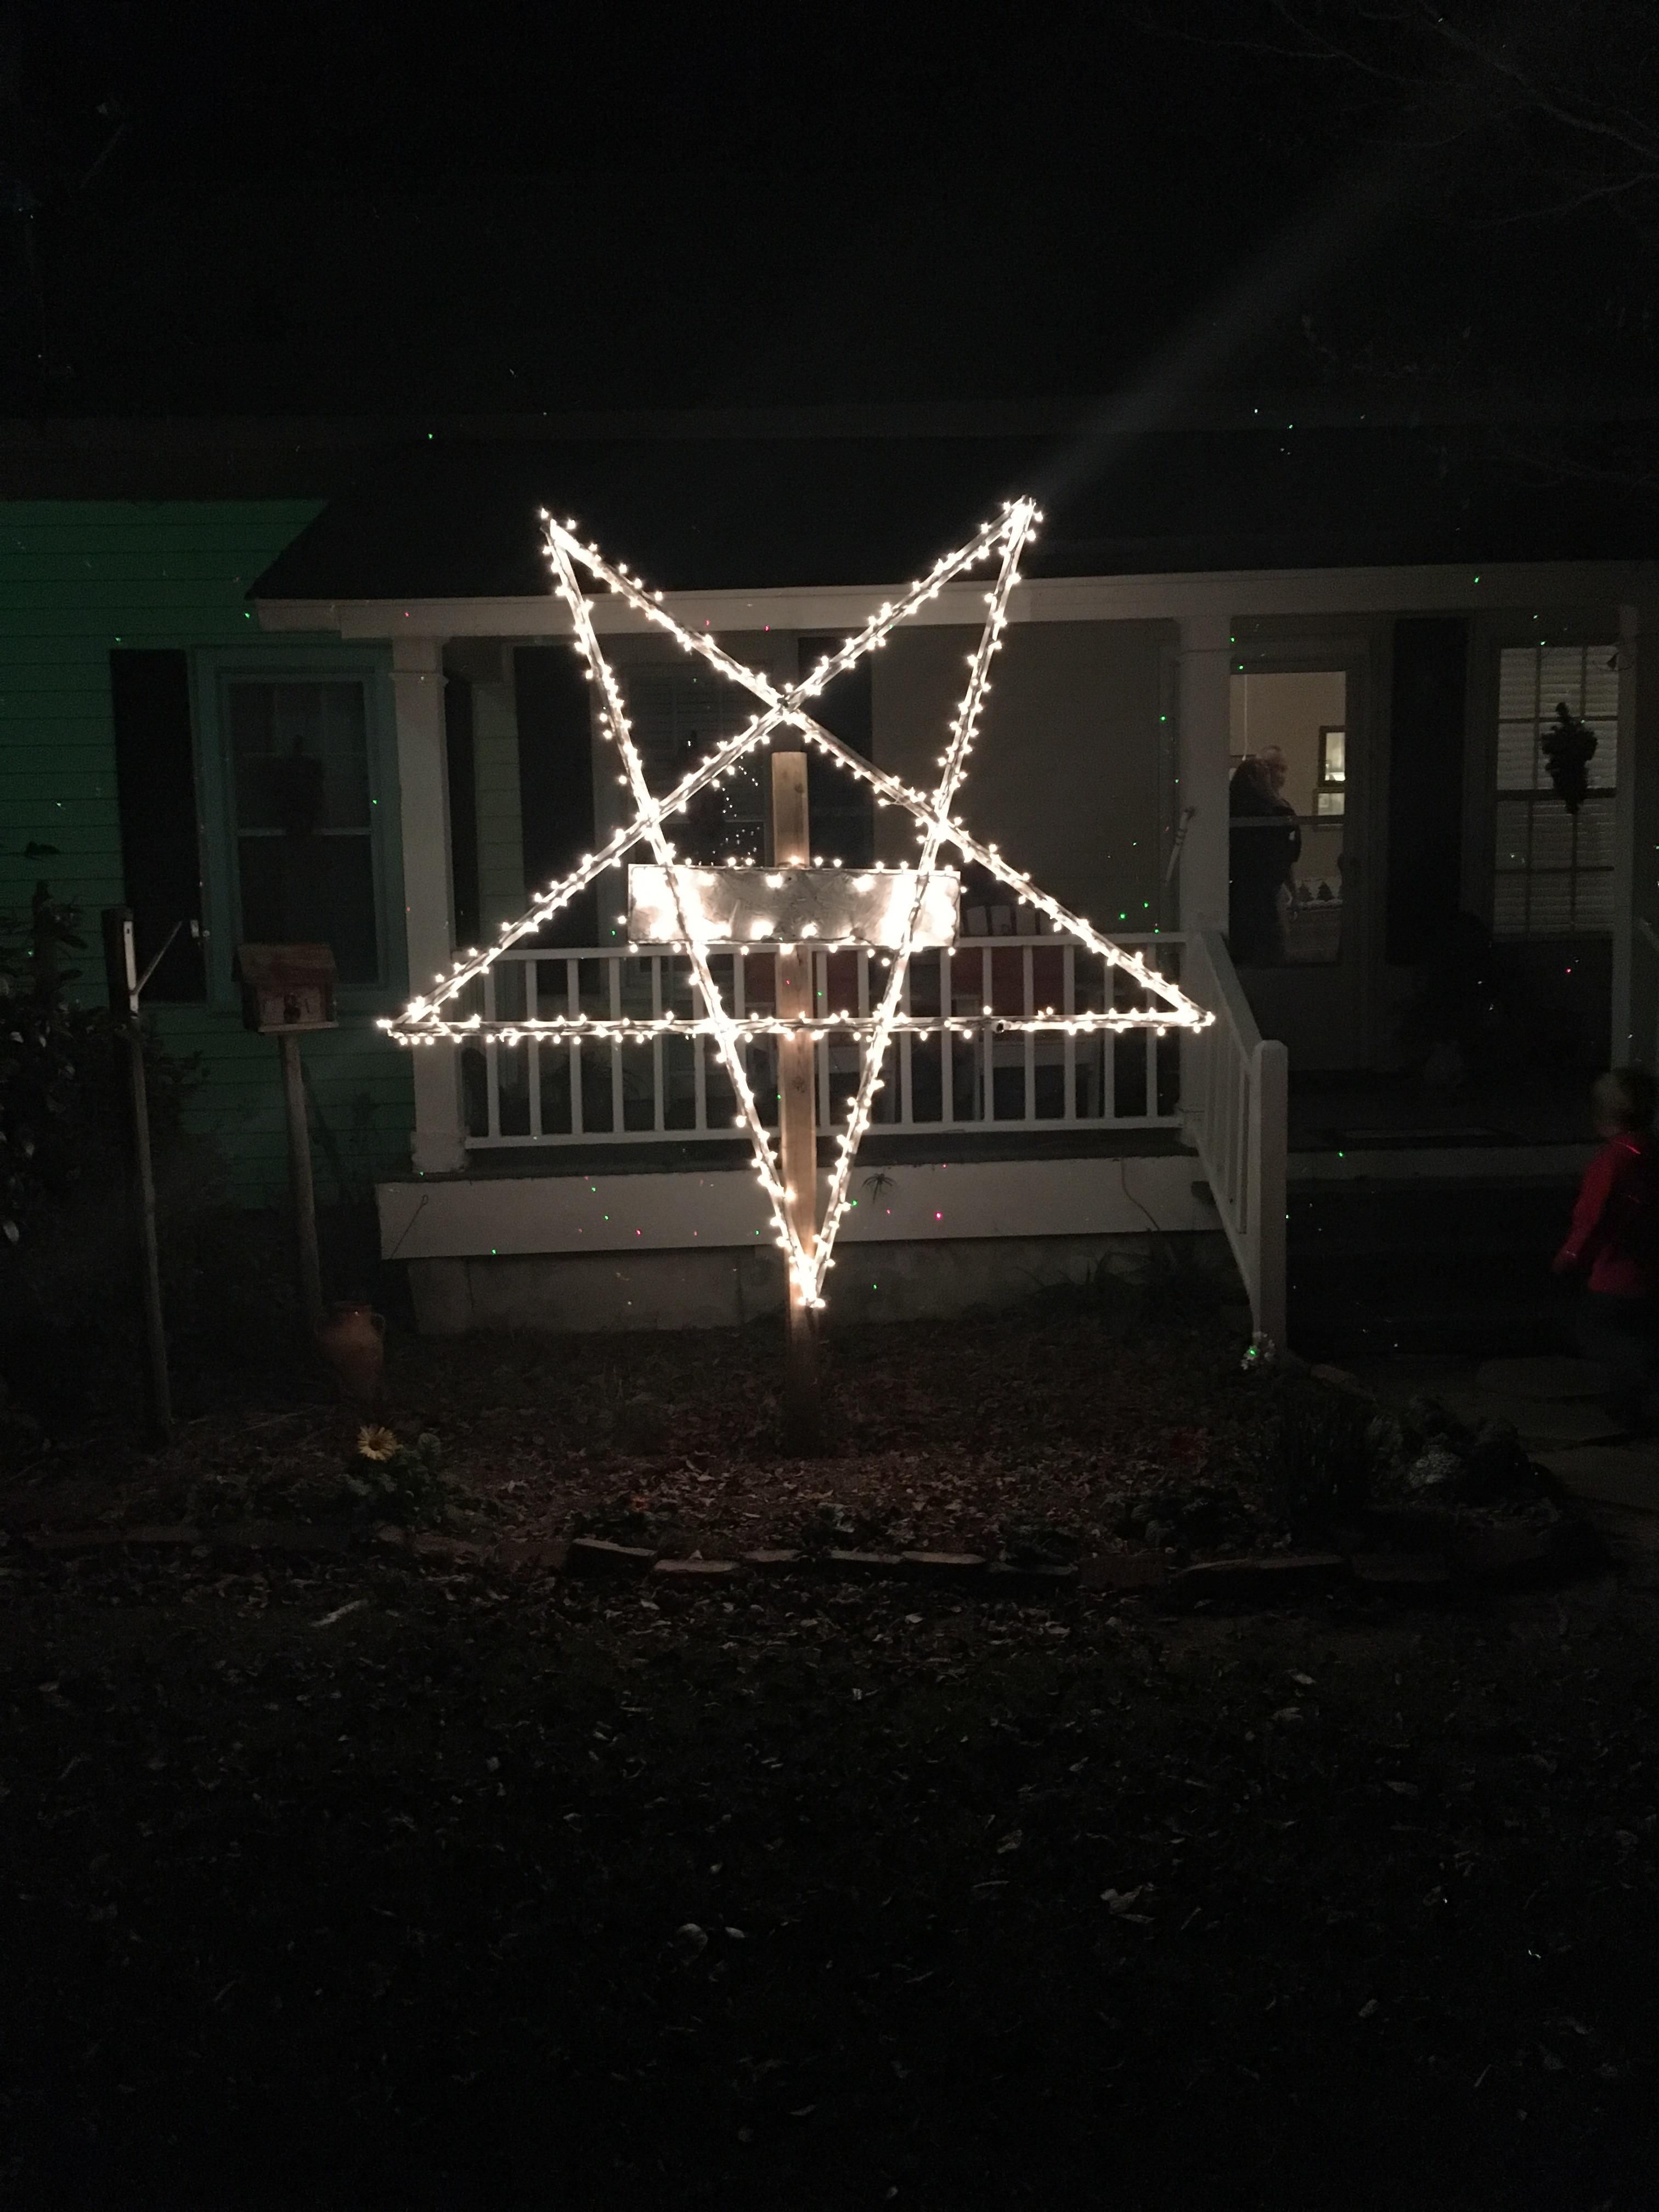 My grandad was super proud of his “Christmas Star” decoration.